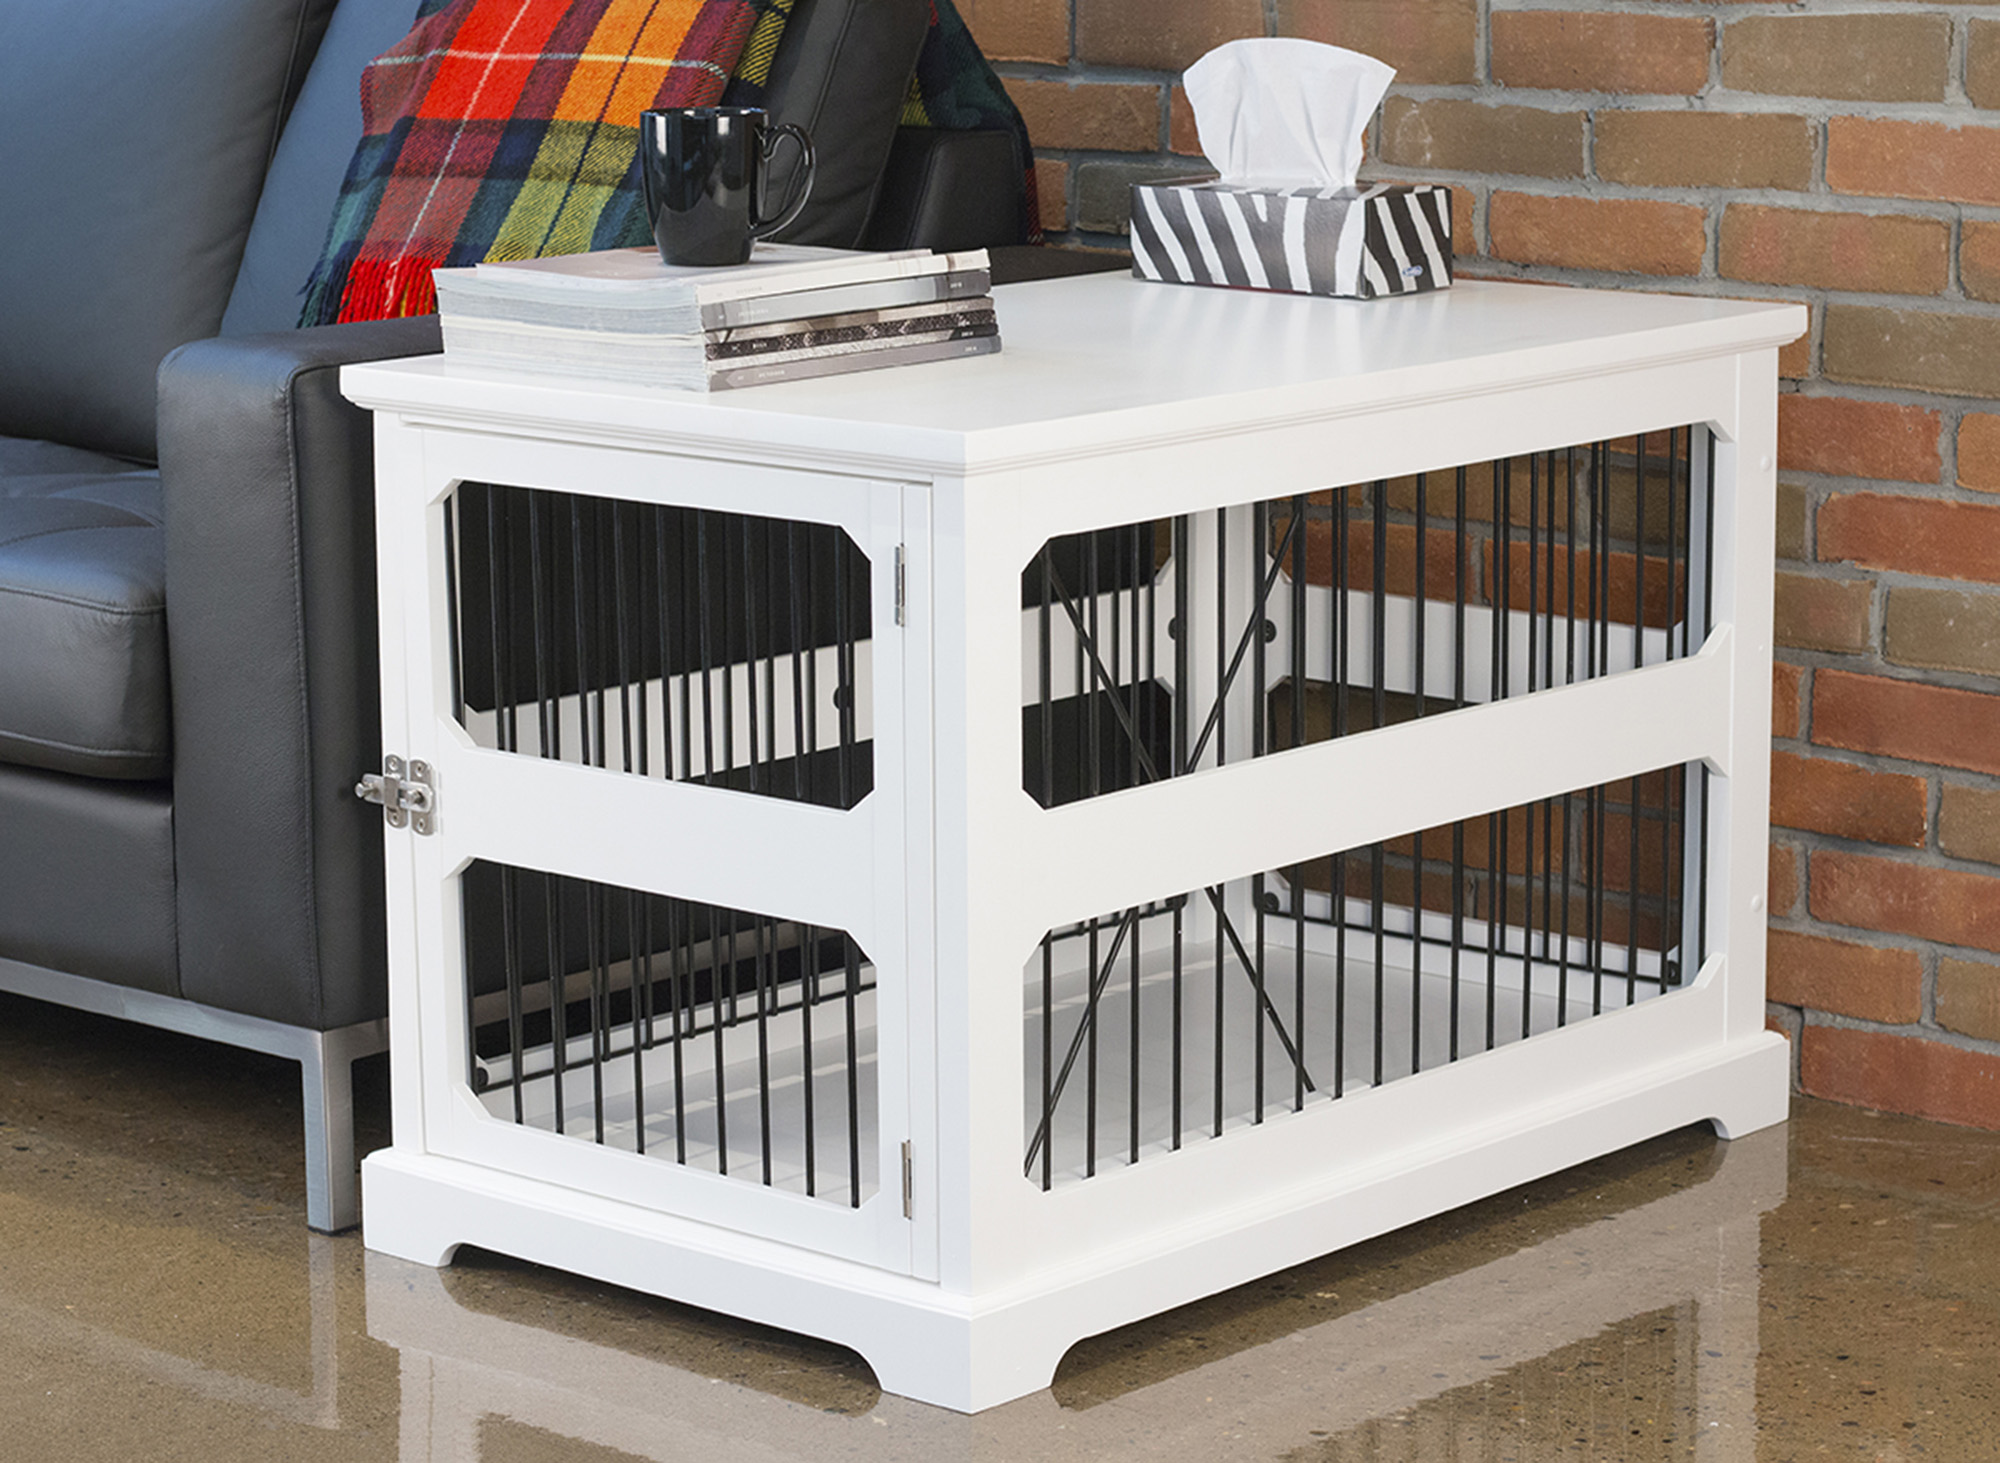 Contemporary Home Living 35.25" White Rectangular Medium Slide Aside Crate and End Table